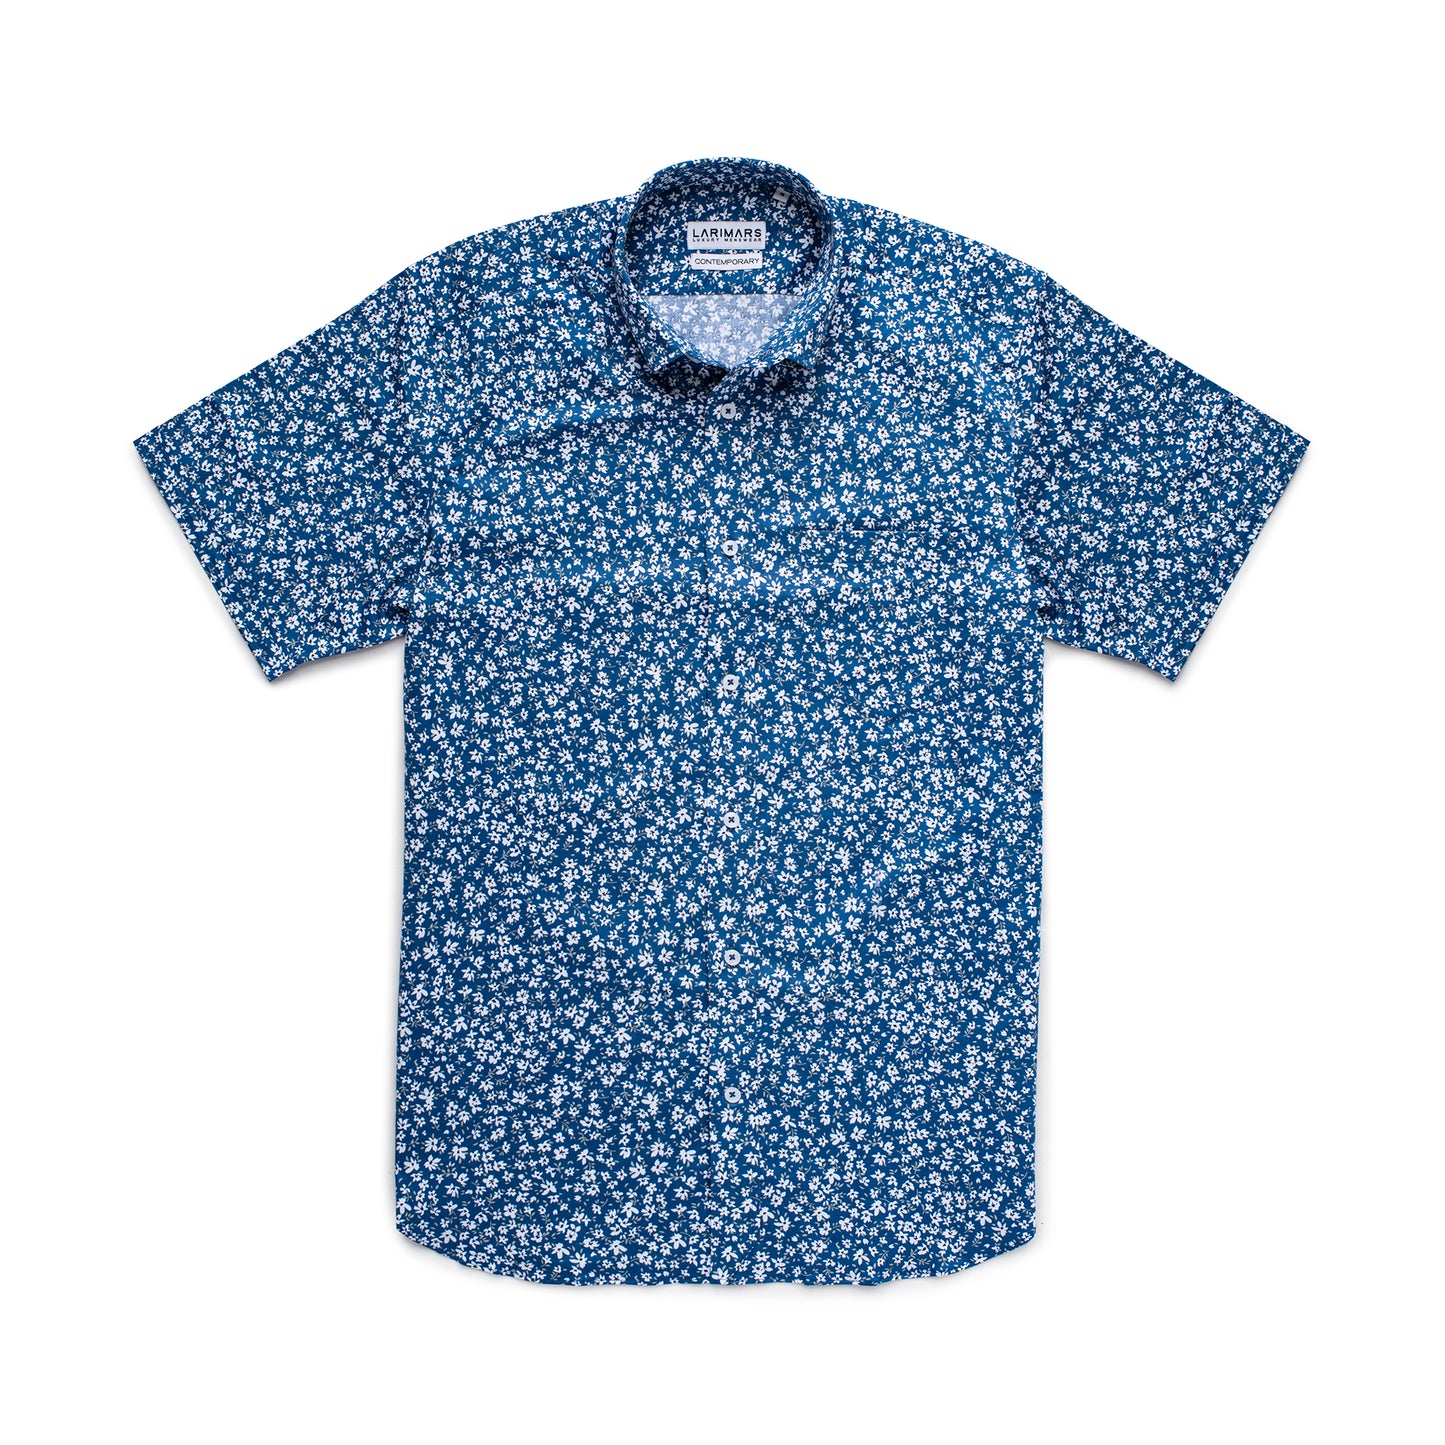 Blue shirt with white Floral Print